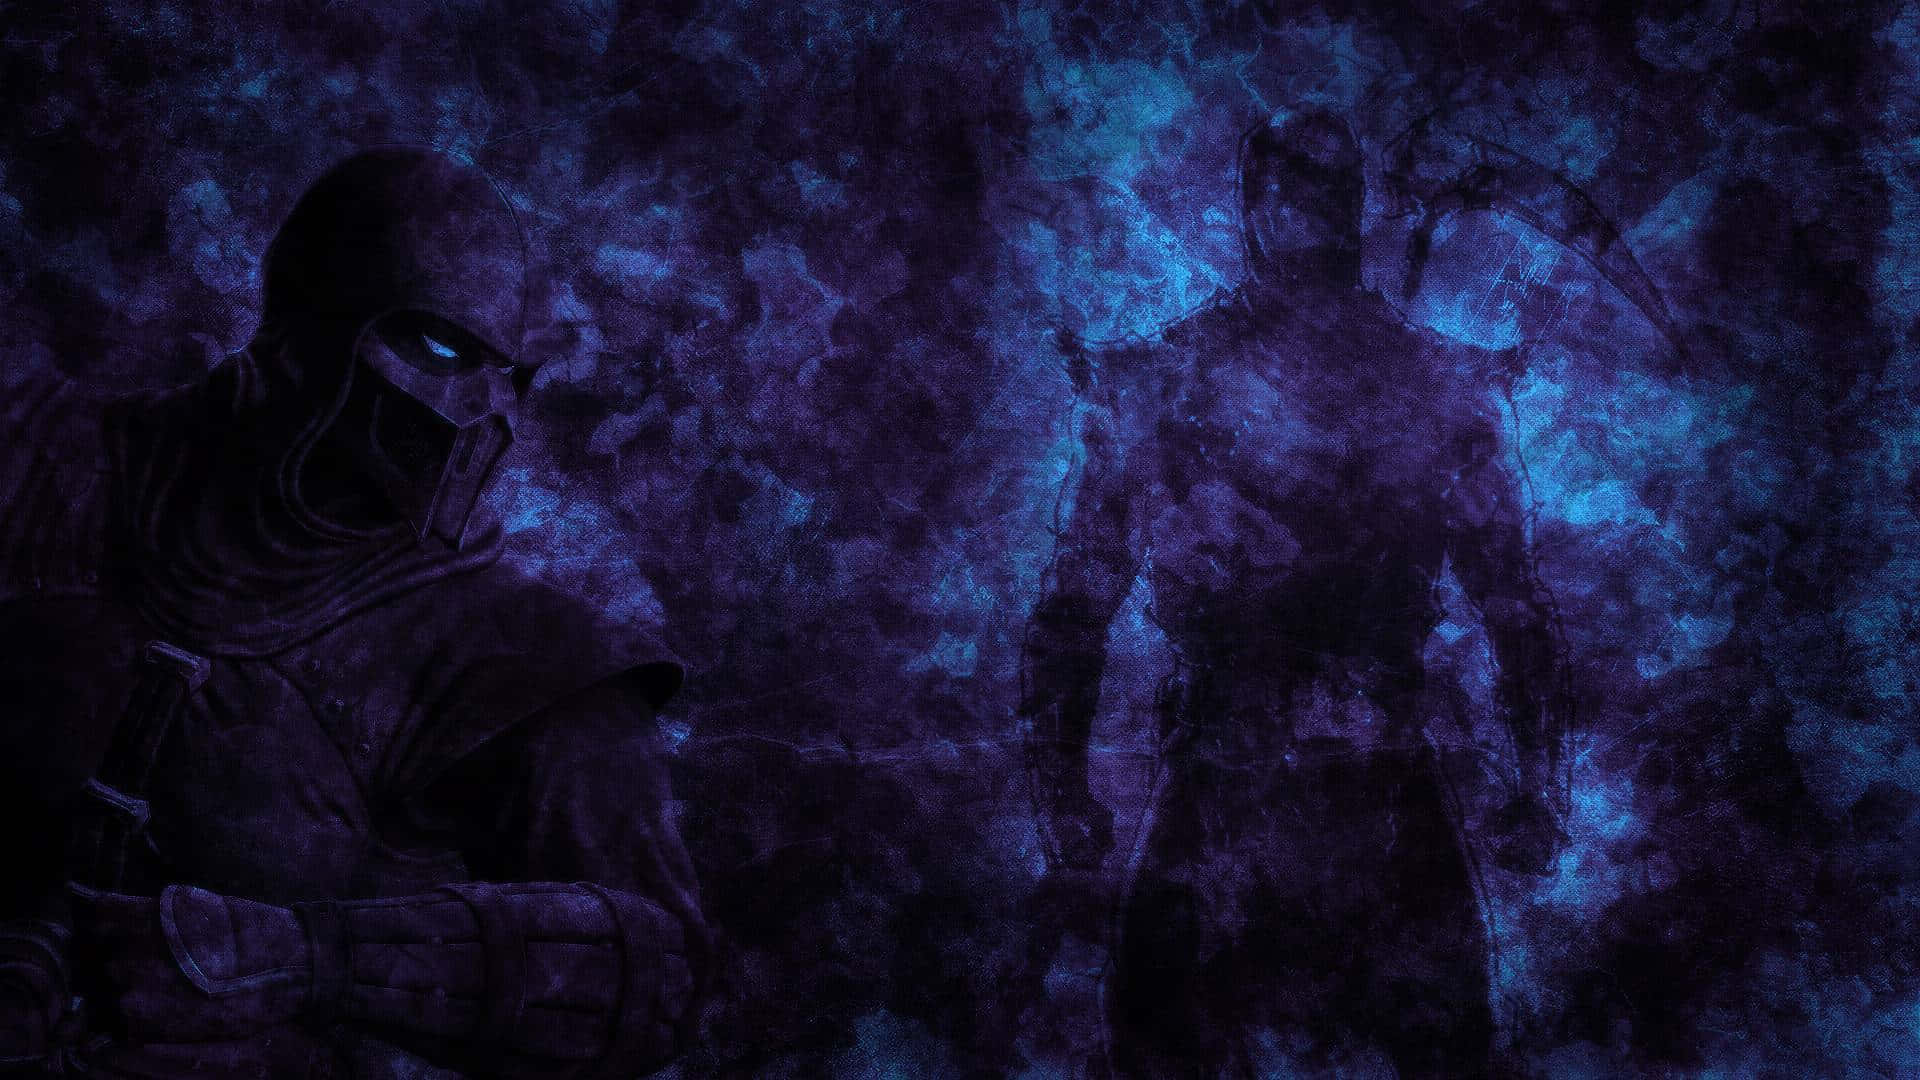 Noob Saibot unleashes his lethal shadow abilities in Mortal Kombat Wallpaper